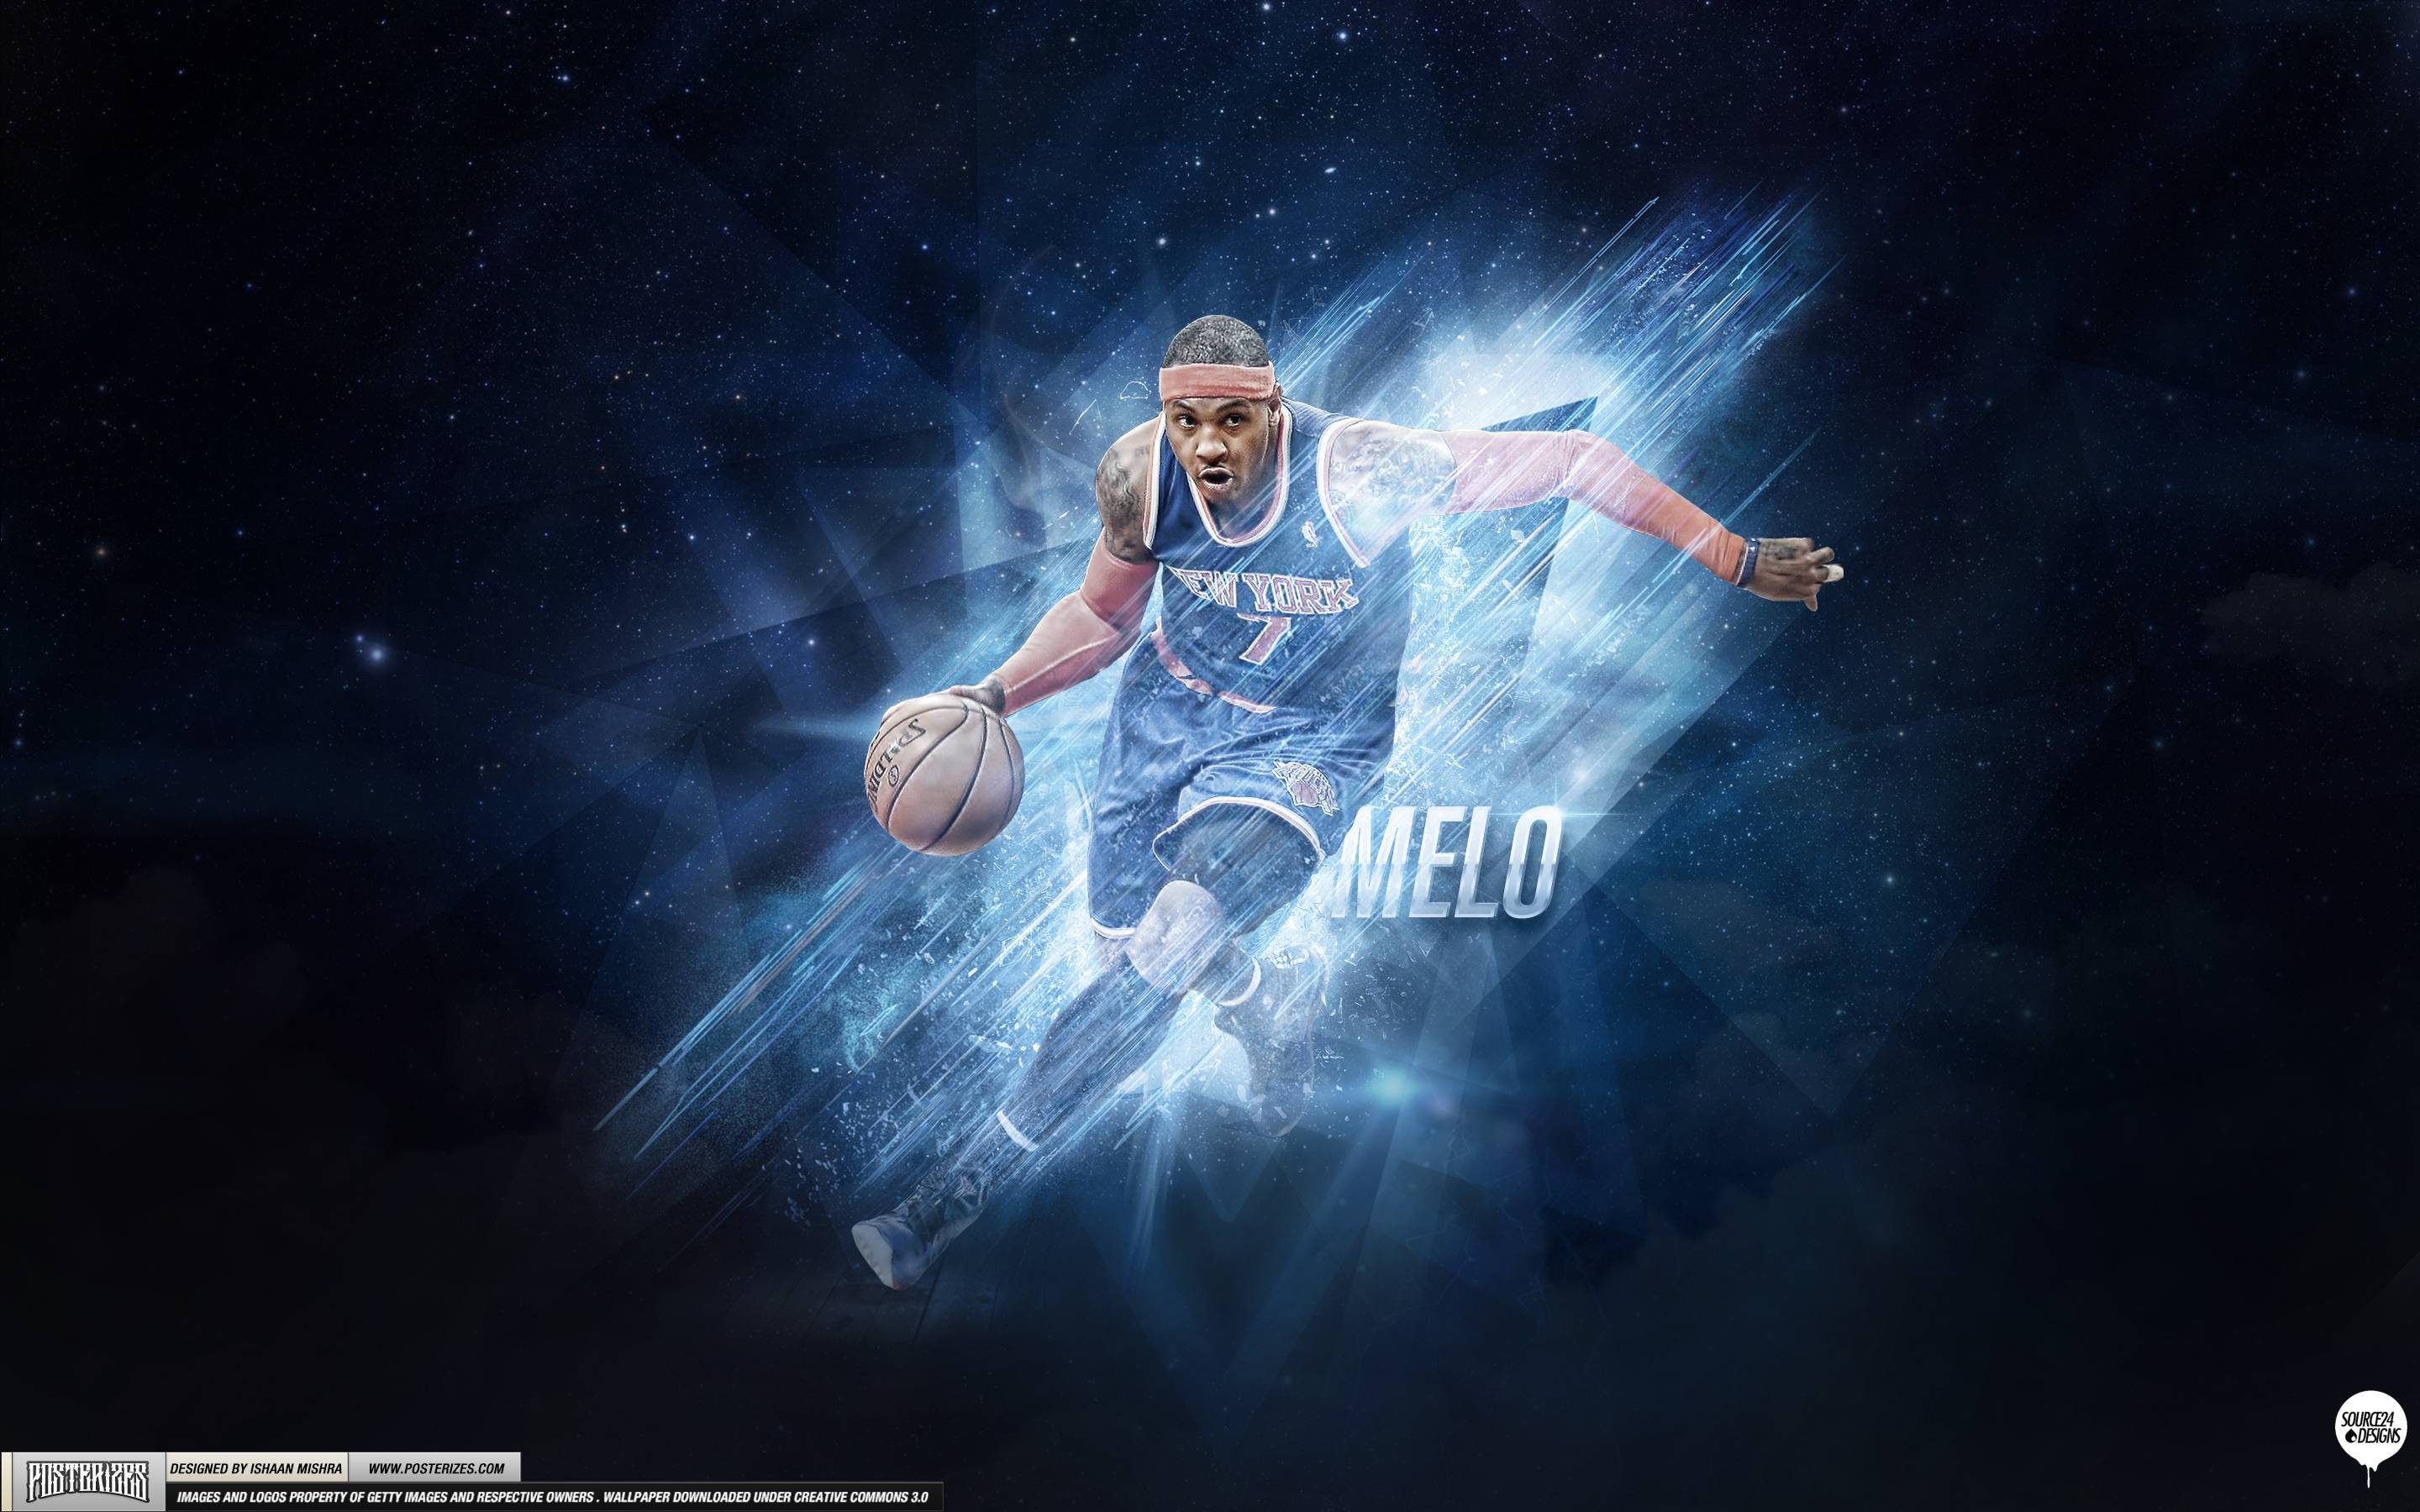 Carmelo Anthony - 'Playoff Push' (WALLPAPER)